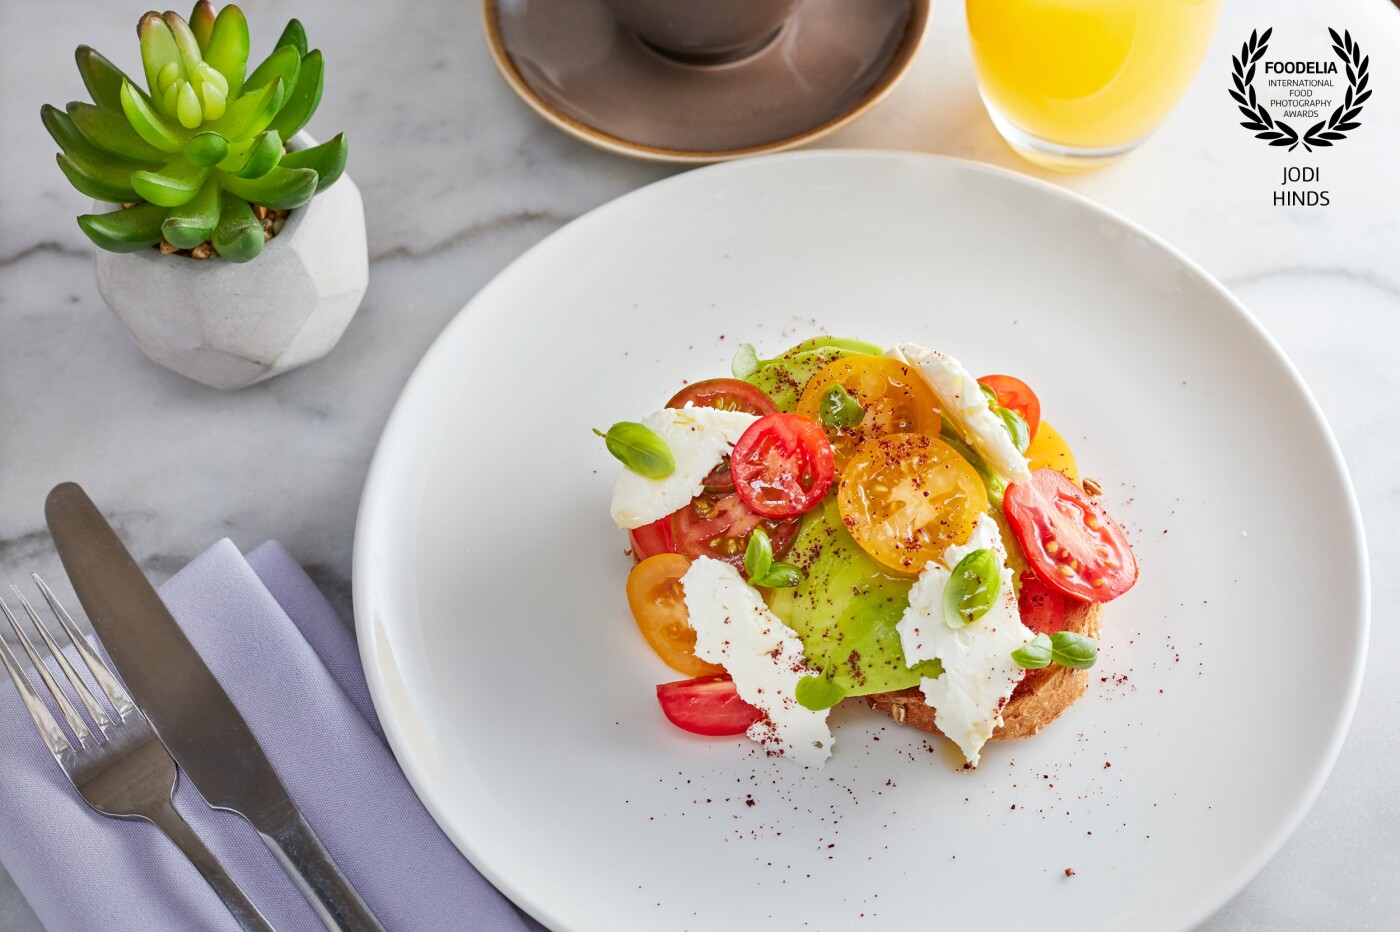 Really exciting private members club @AllBright creating opportunities for women to thrive and flourish. This dish gloriously created by @sabrina_gidda for a healthy, fresh and delicious breakfast of avocado, tomato on sourdough.<br />
Inspiring menu and fabulous team!